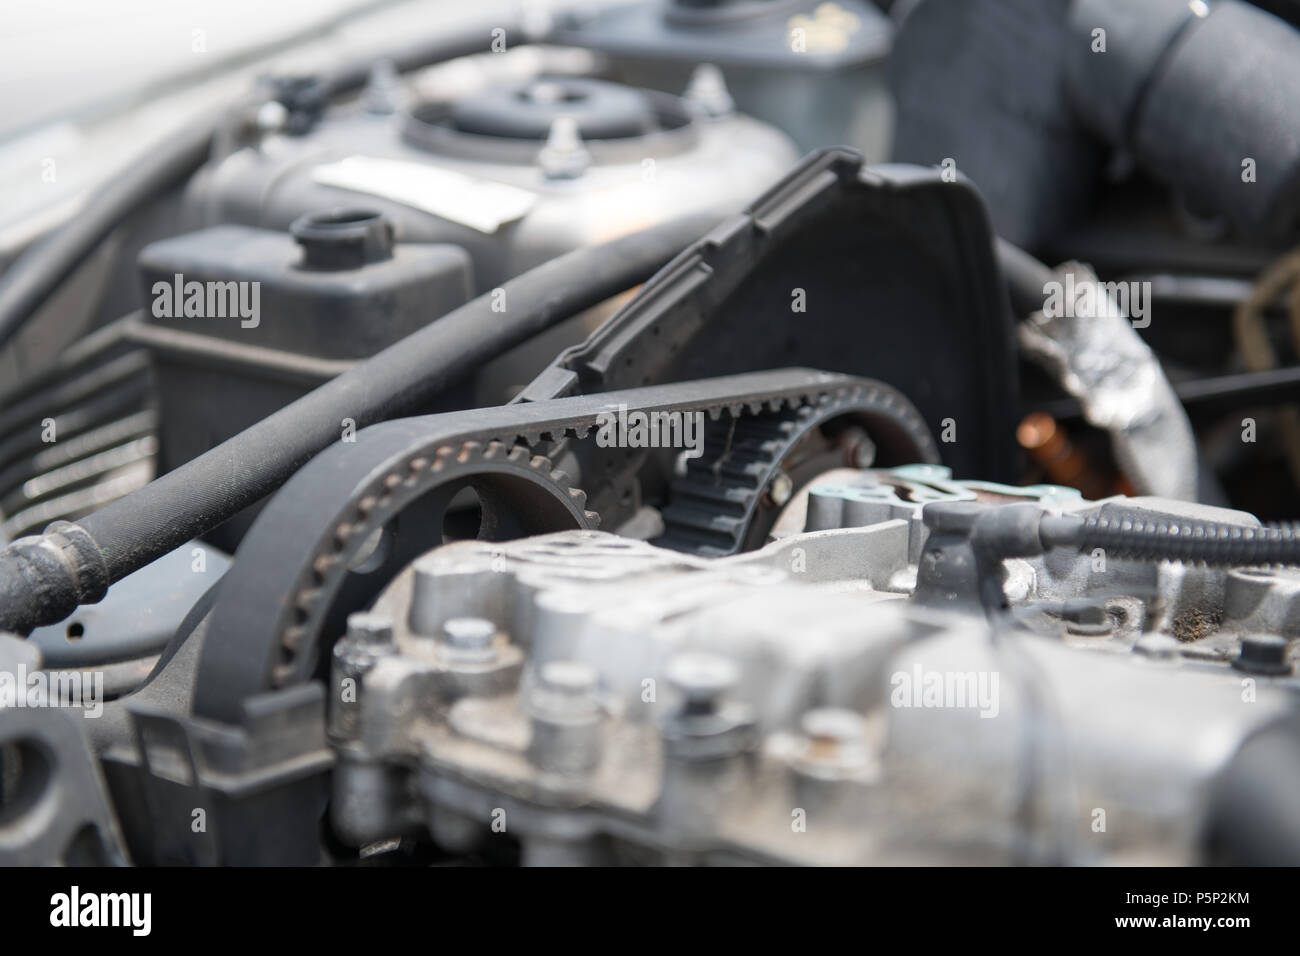 Timing Belt Engine Car High Resolution Stock Photography and Images - Alamy